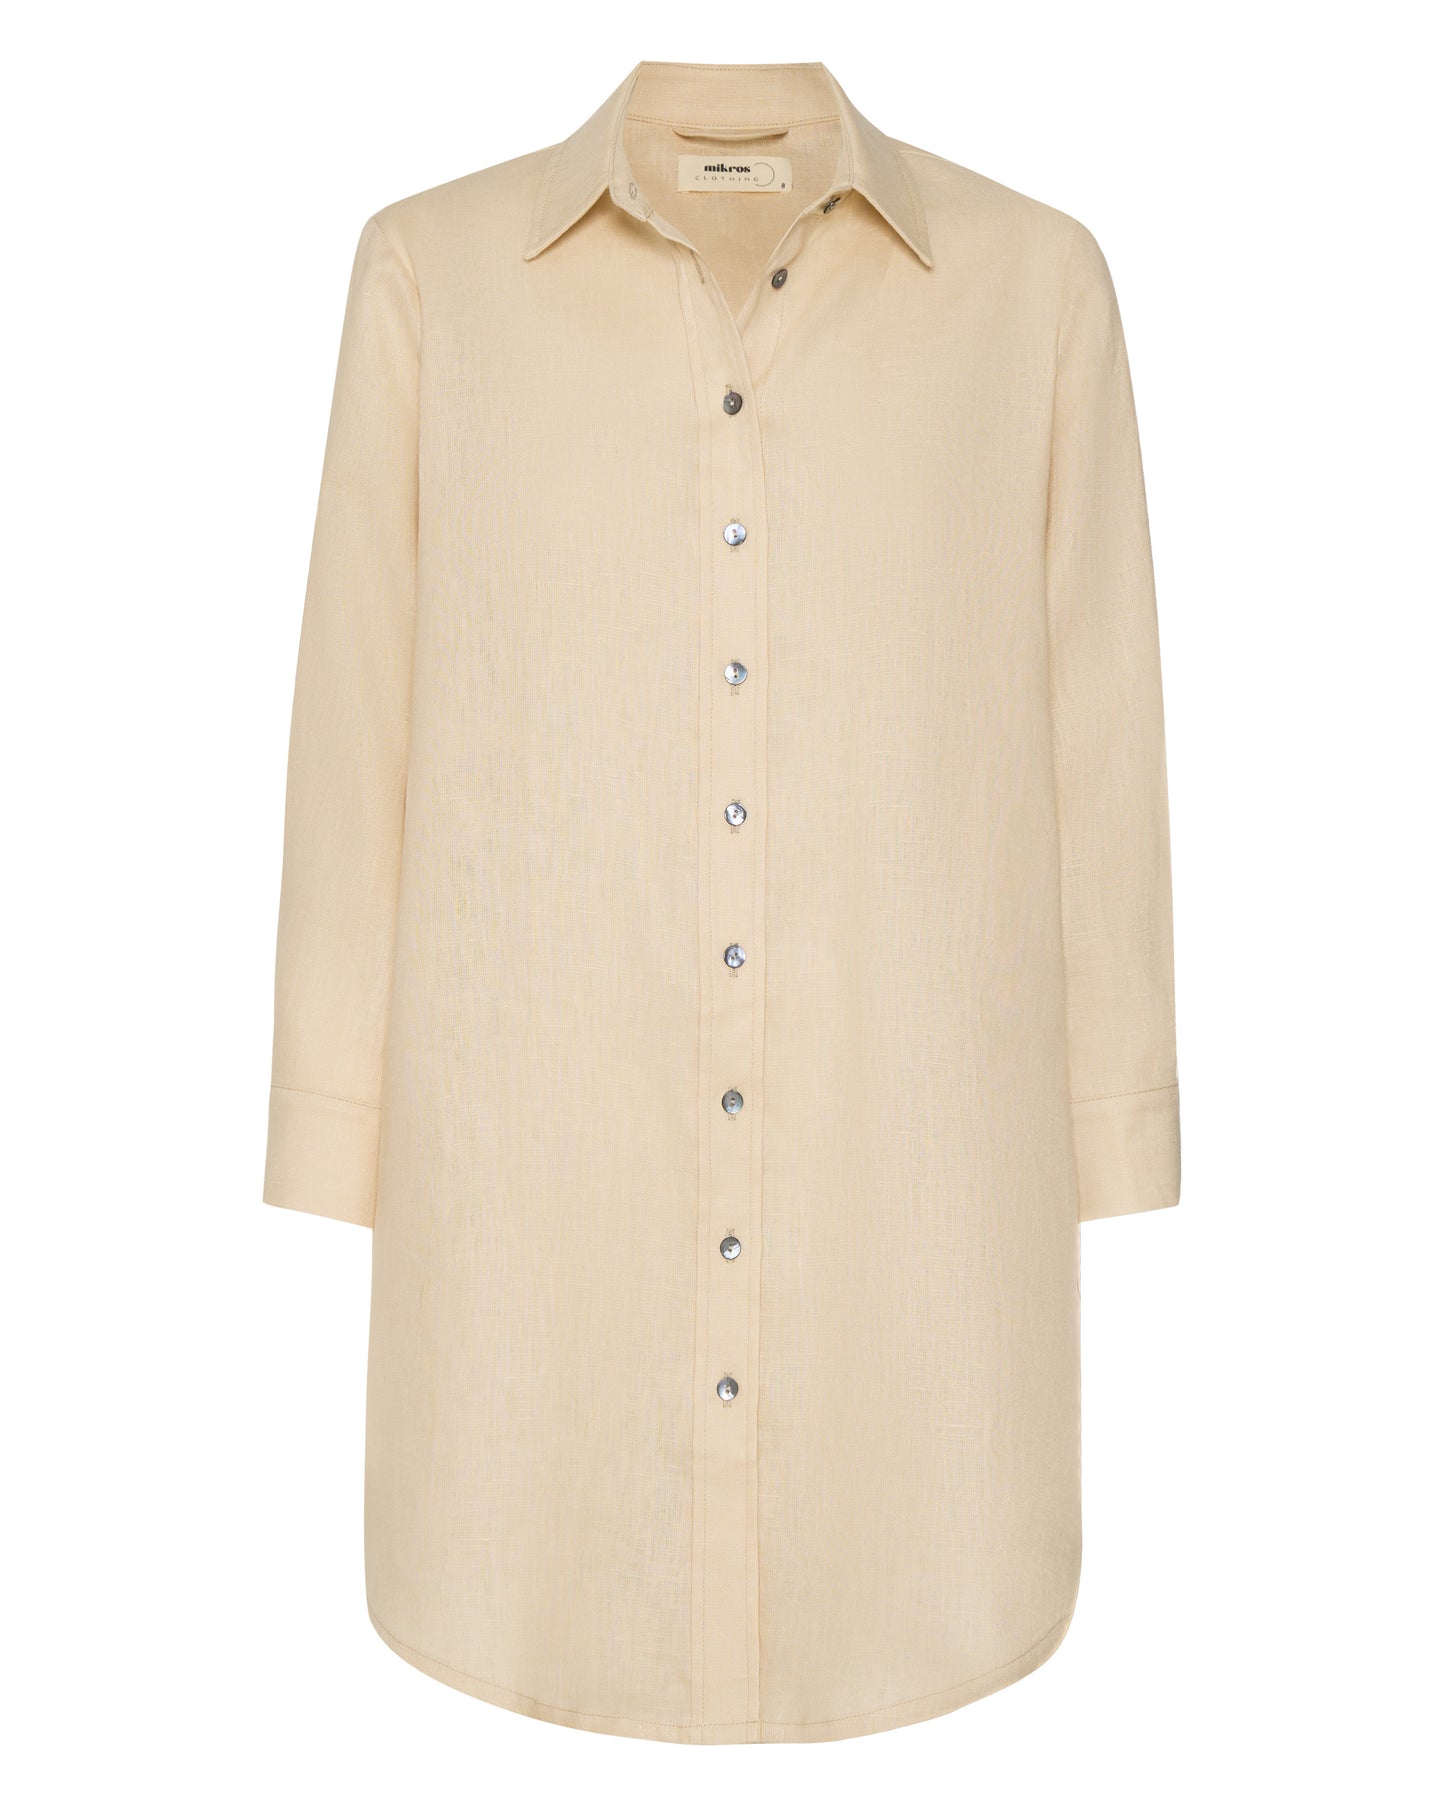 The front of a short sandy beige shirt dress without a waist tie.